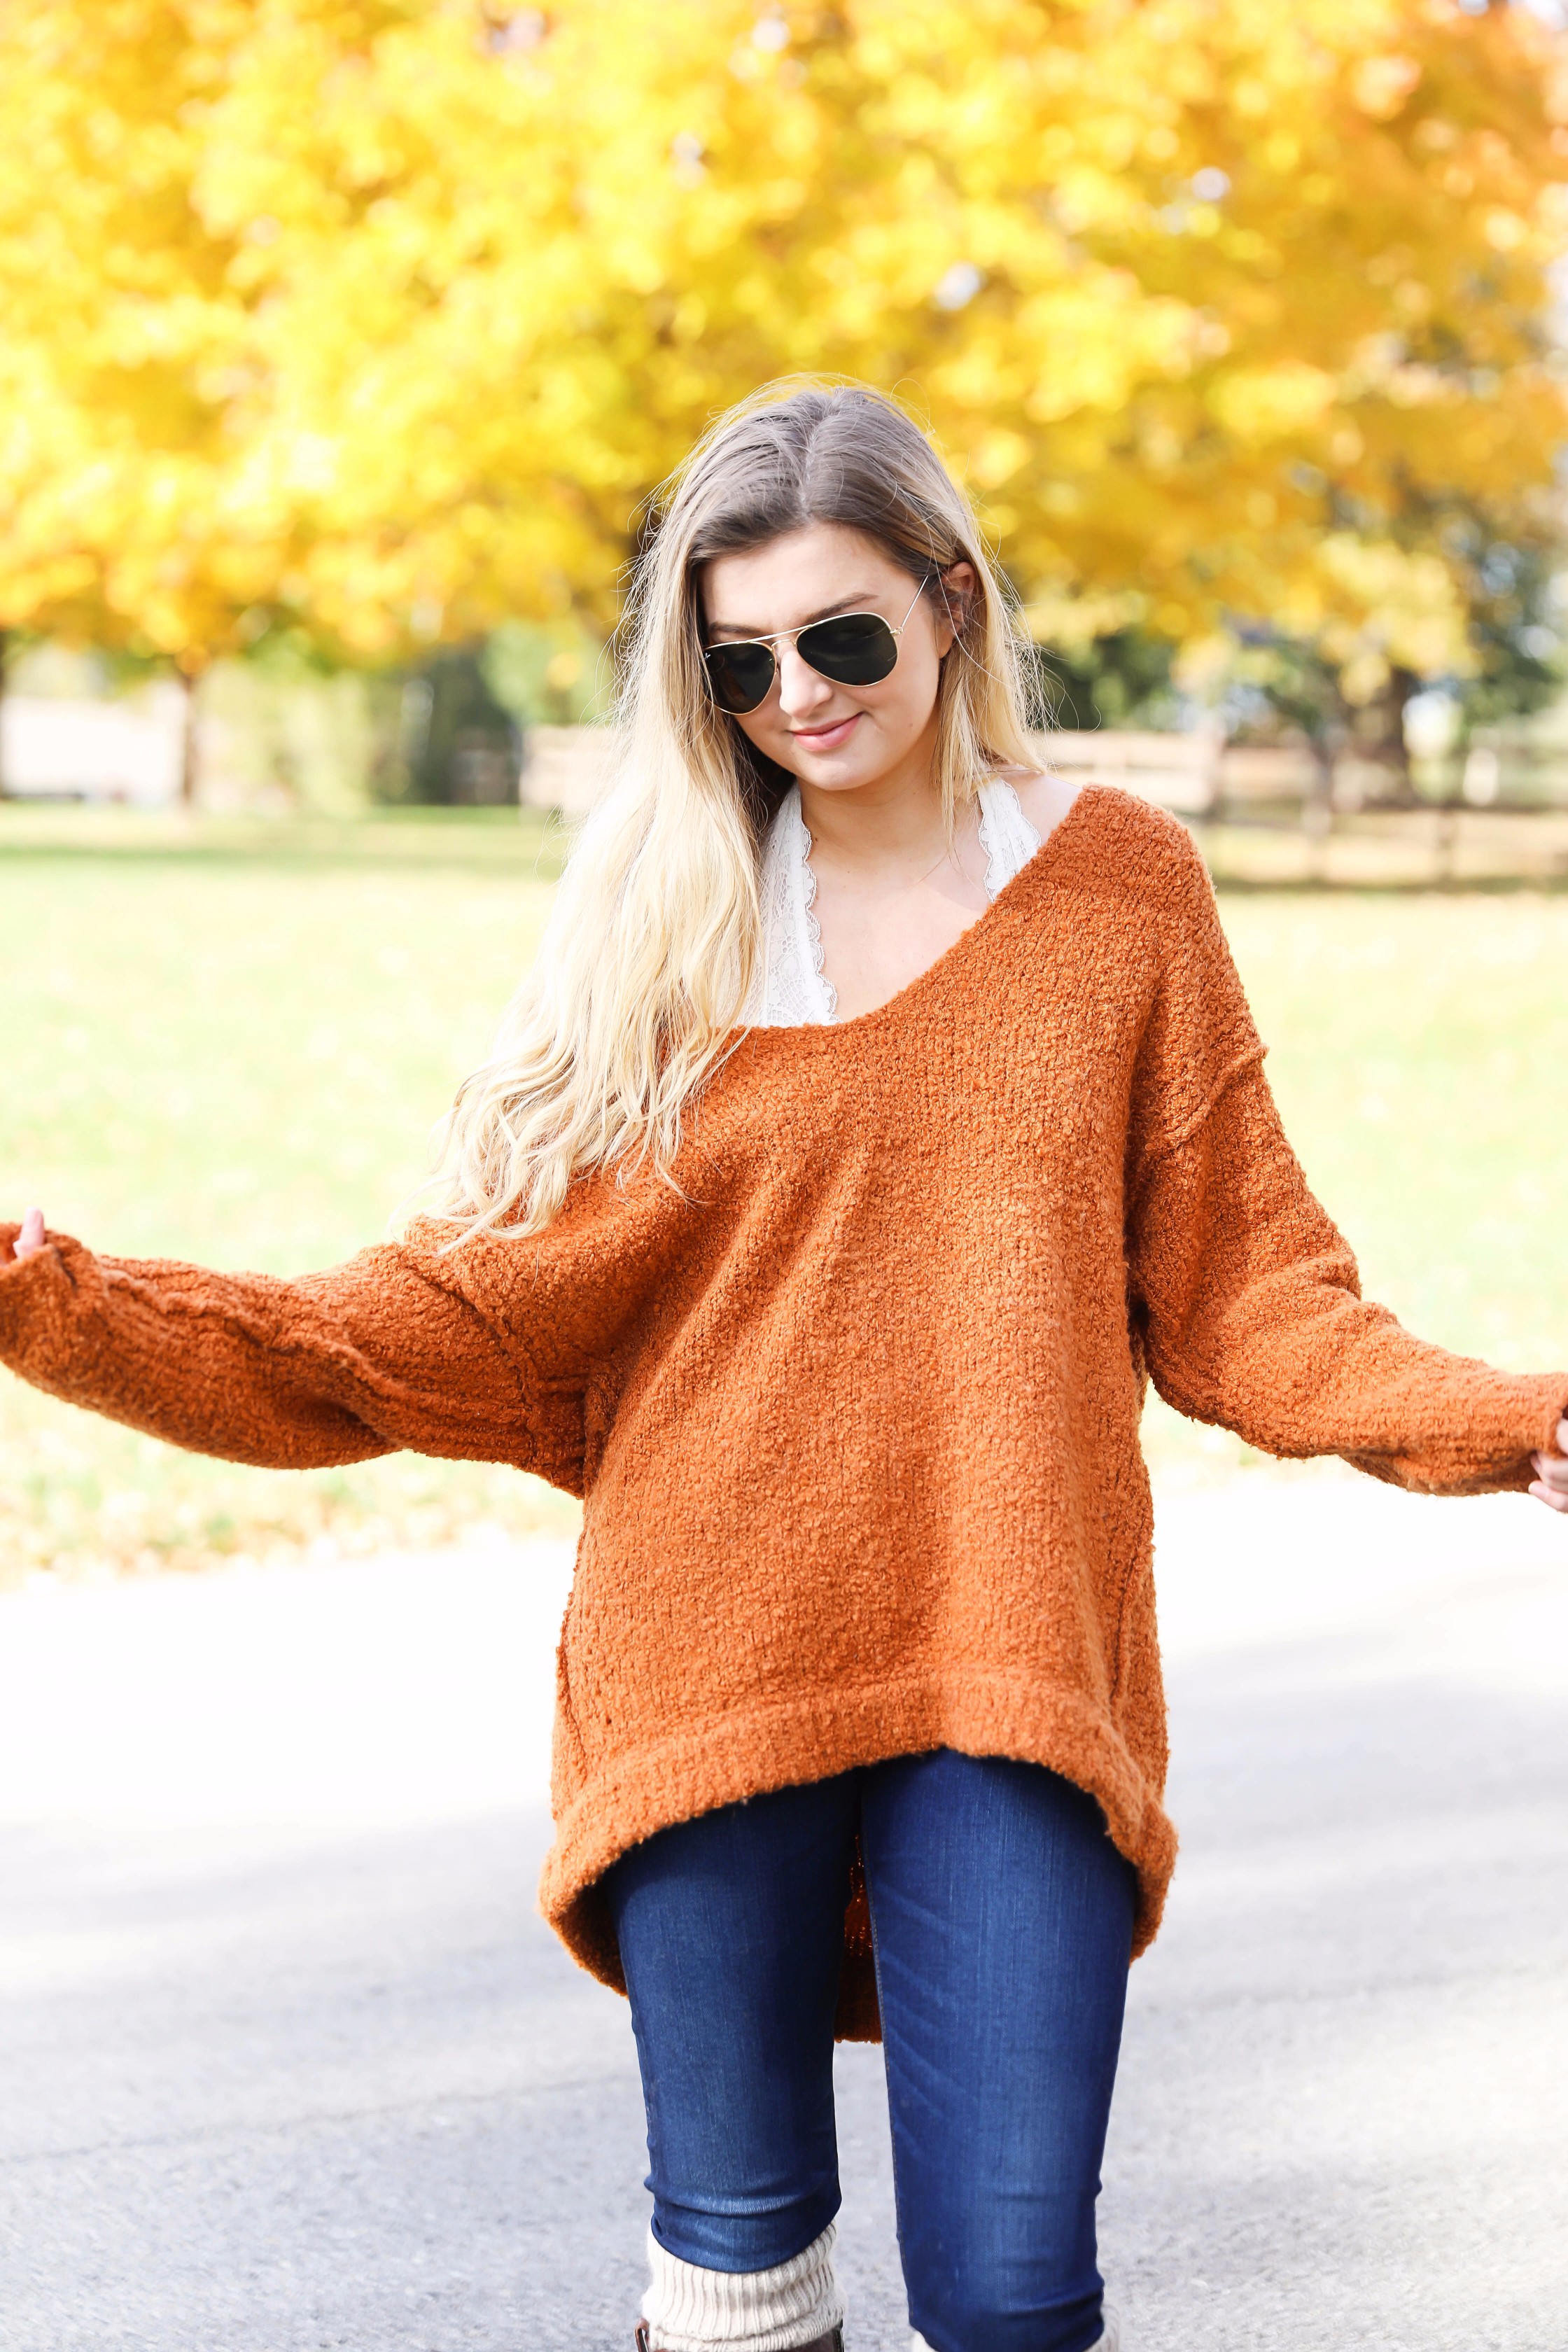 Burnt orange soft free people sweater paired with frye boots and cable knit socks. Fall fashion inspiration! Get details on daily dose of charm fashion blog lauren lindmark